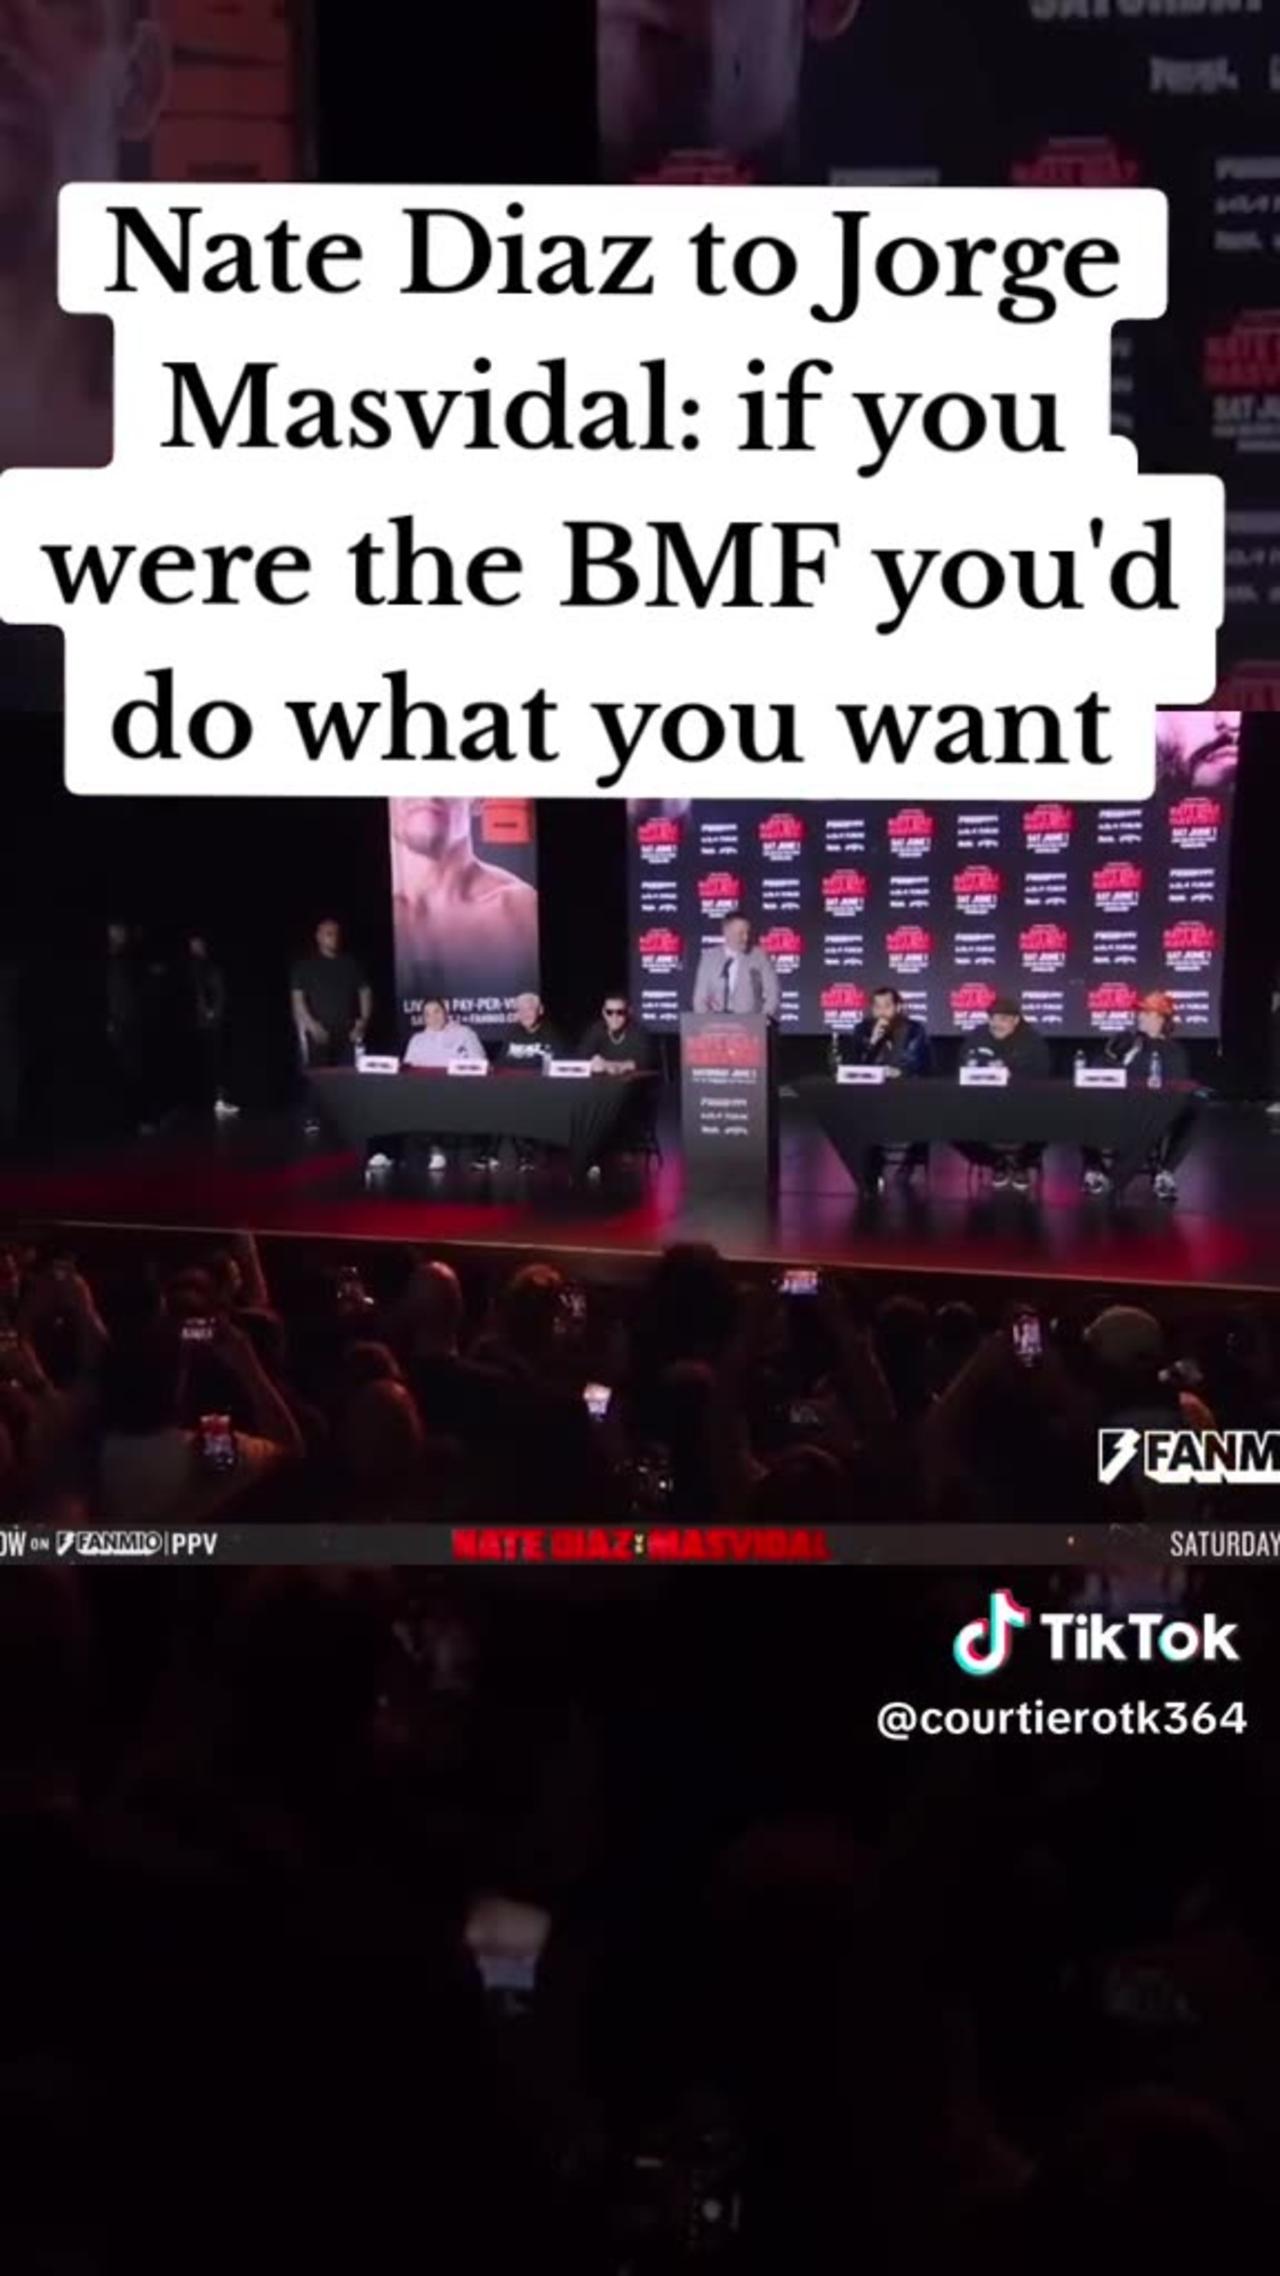 Nate Diaz to Jorge Masvidal: if you were the BMF you'd do what you want.